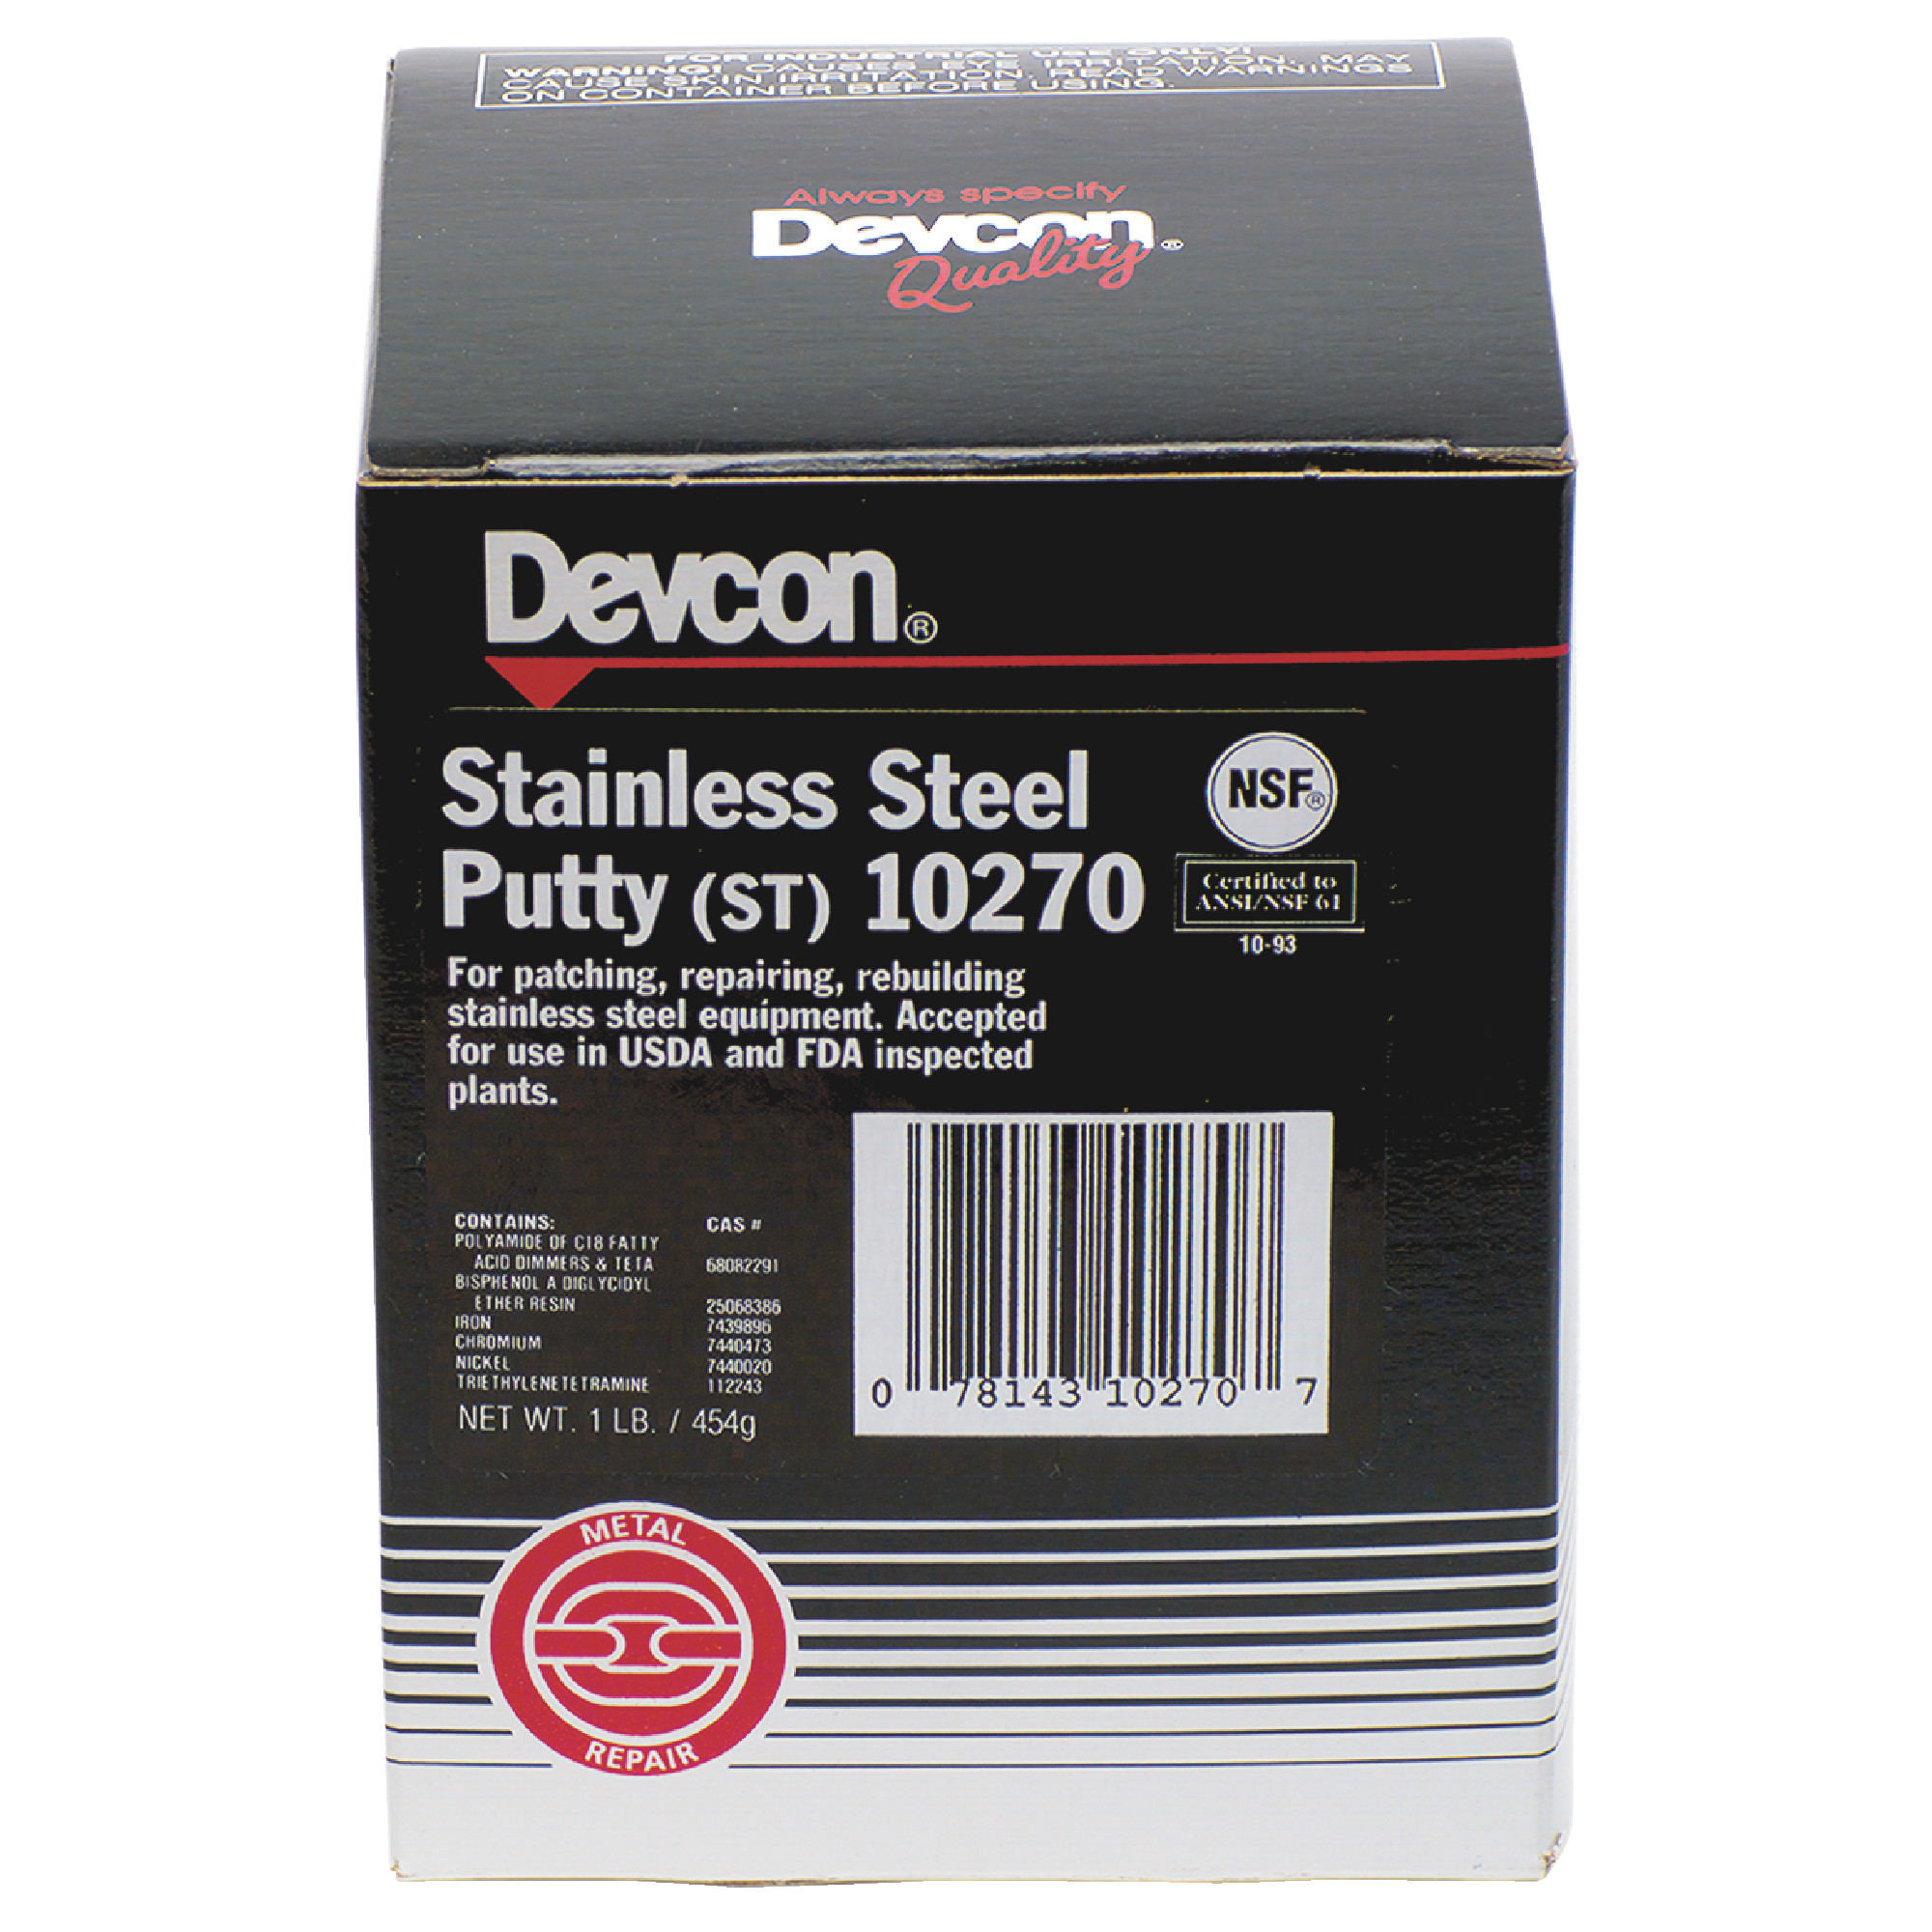 Stainless Steel Putty (ST)